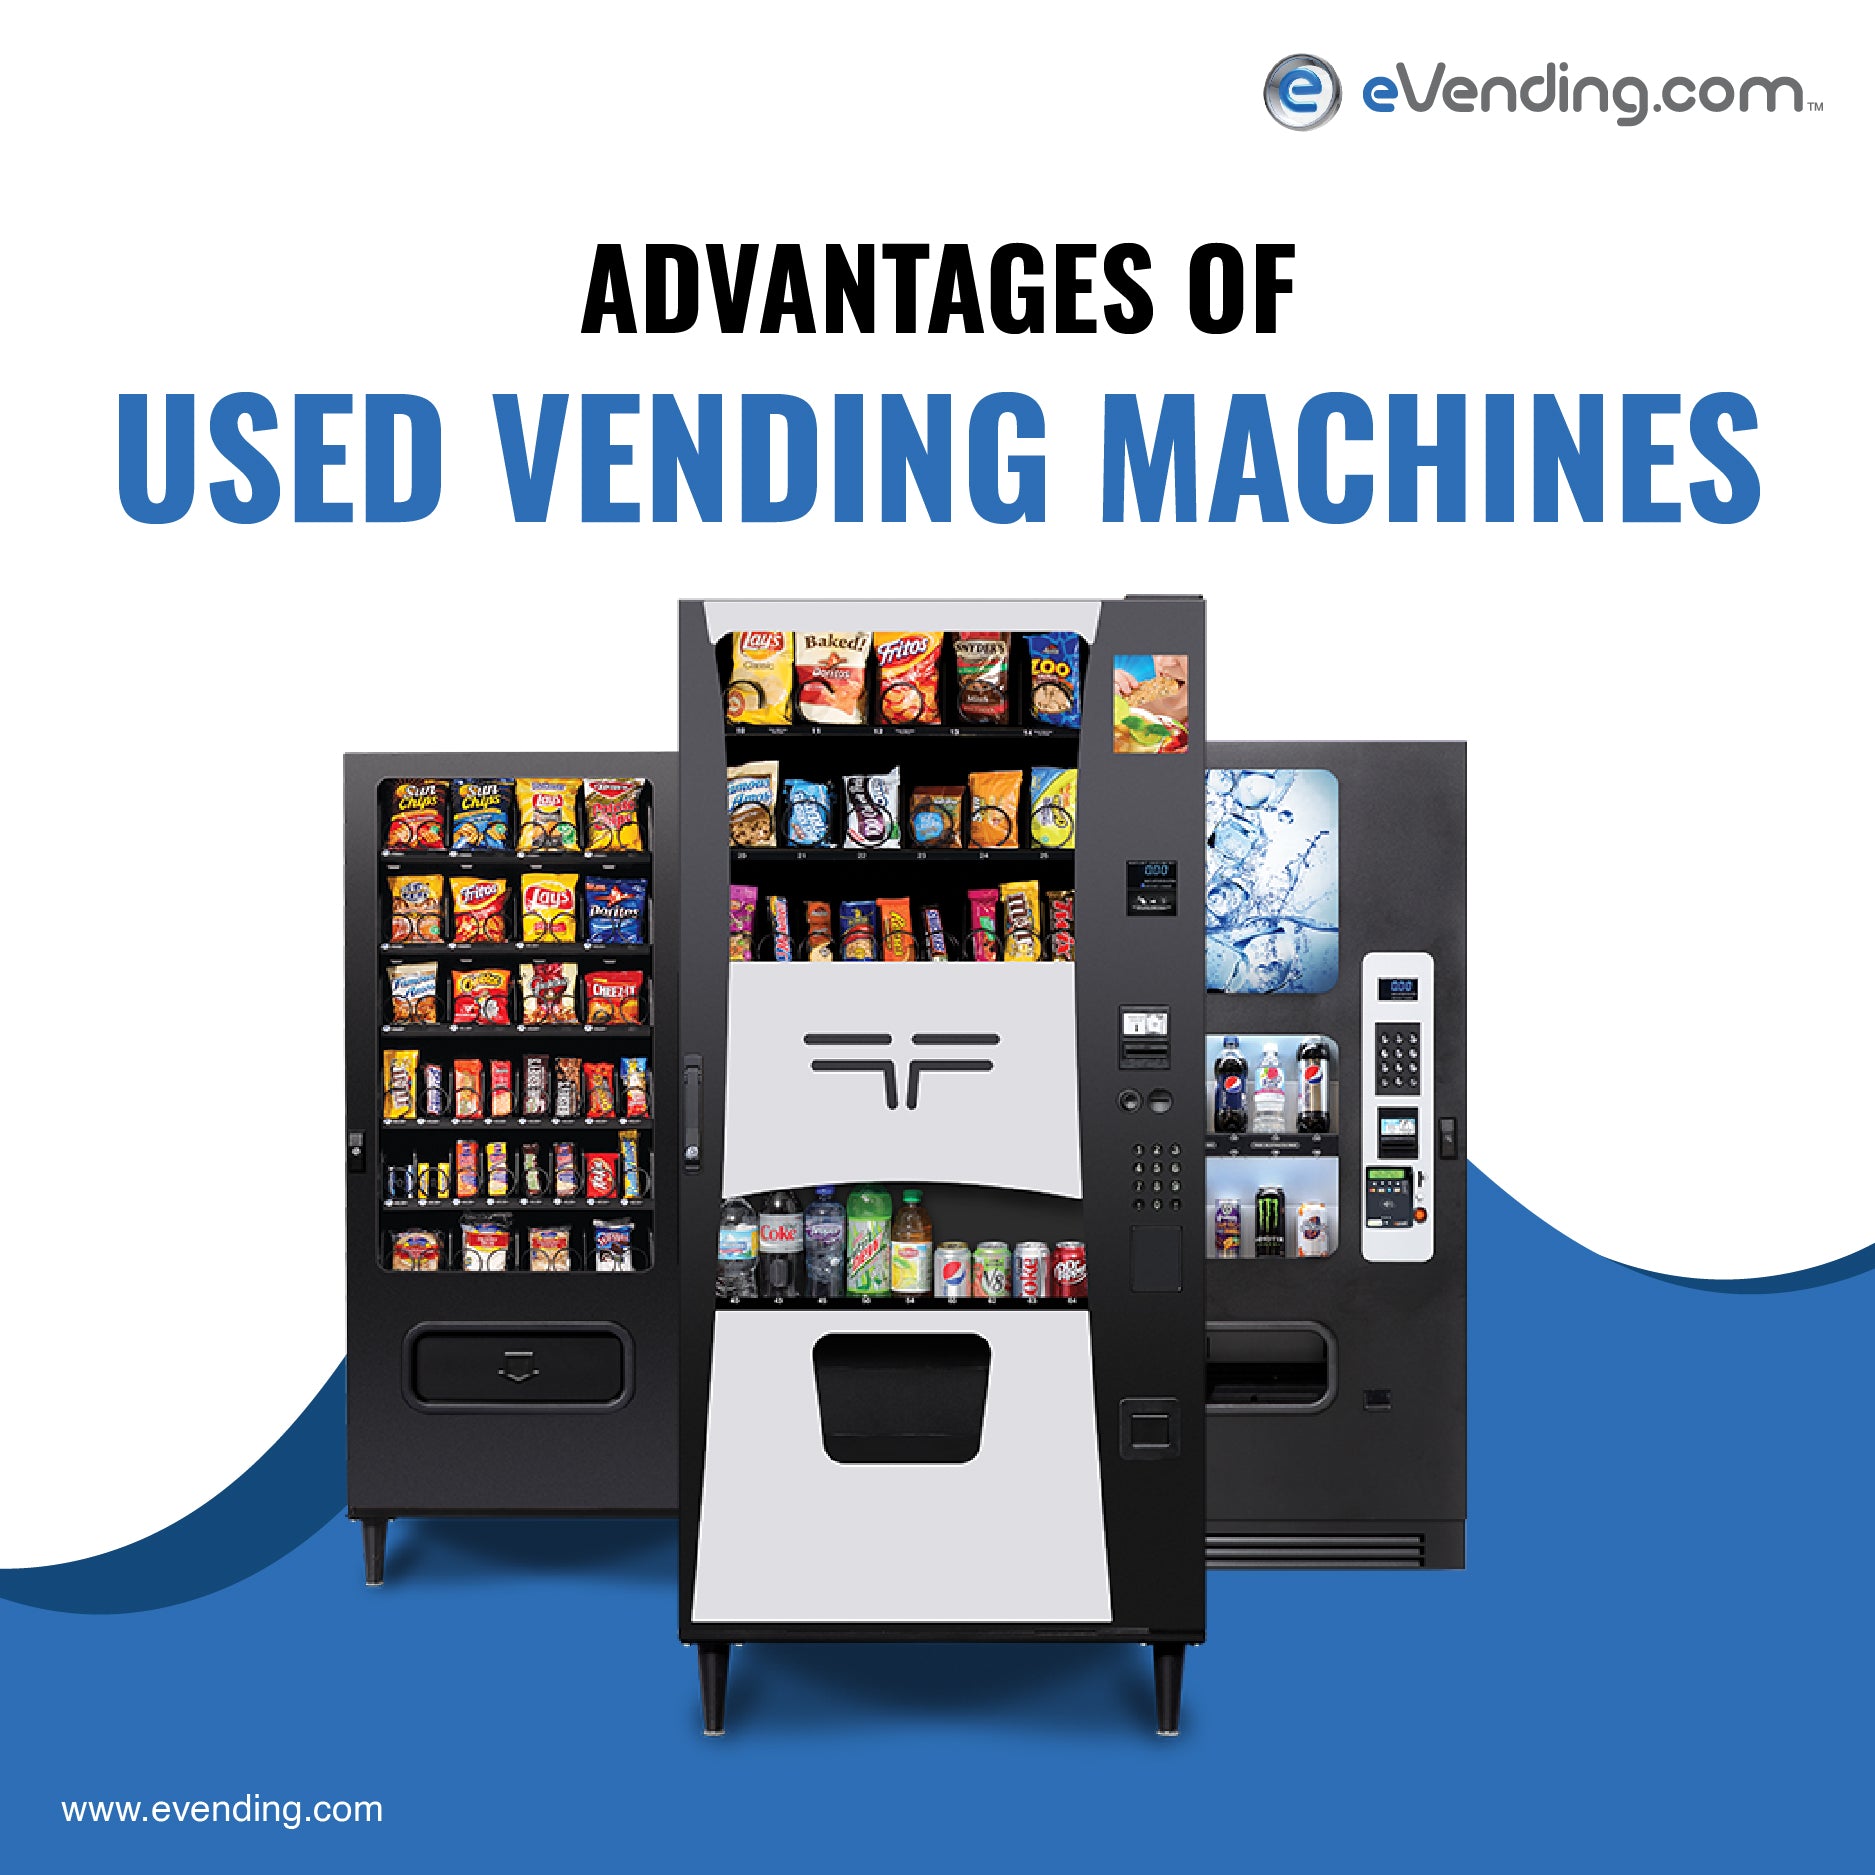 Why Used Vending Machines Are a Smart Investment